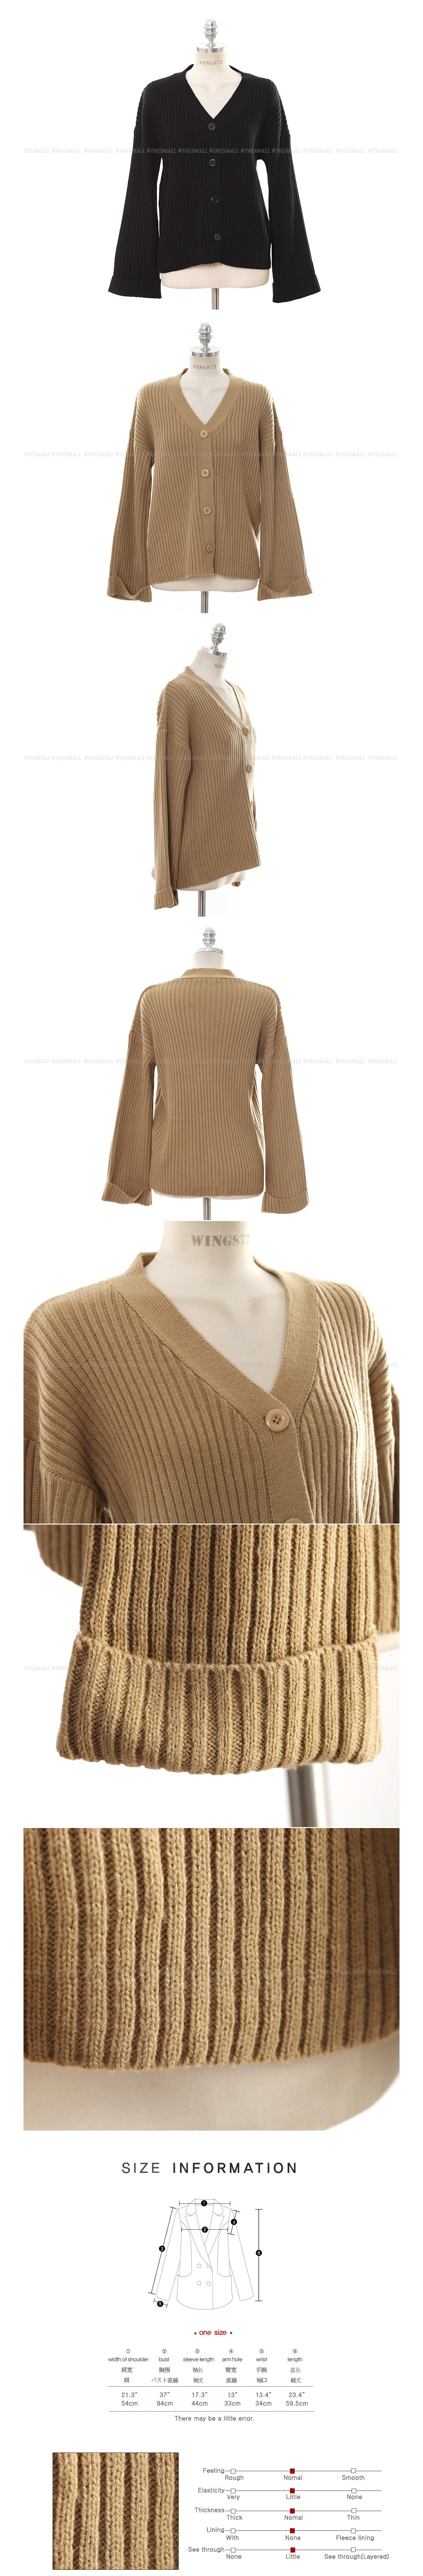 KOREA Ribbed Knit Cardigan+Skirt 2 Pieces Set Beige One Size(S-M) [Free Shipping]